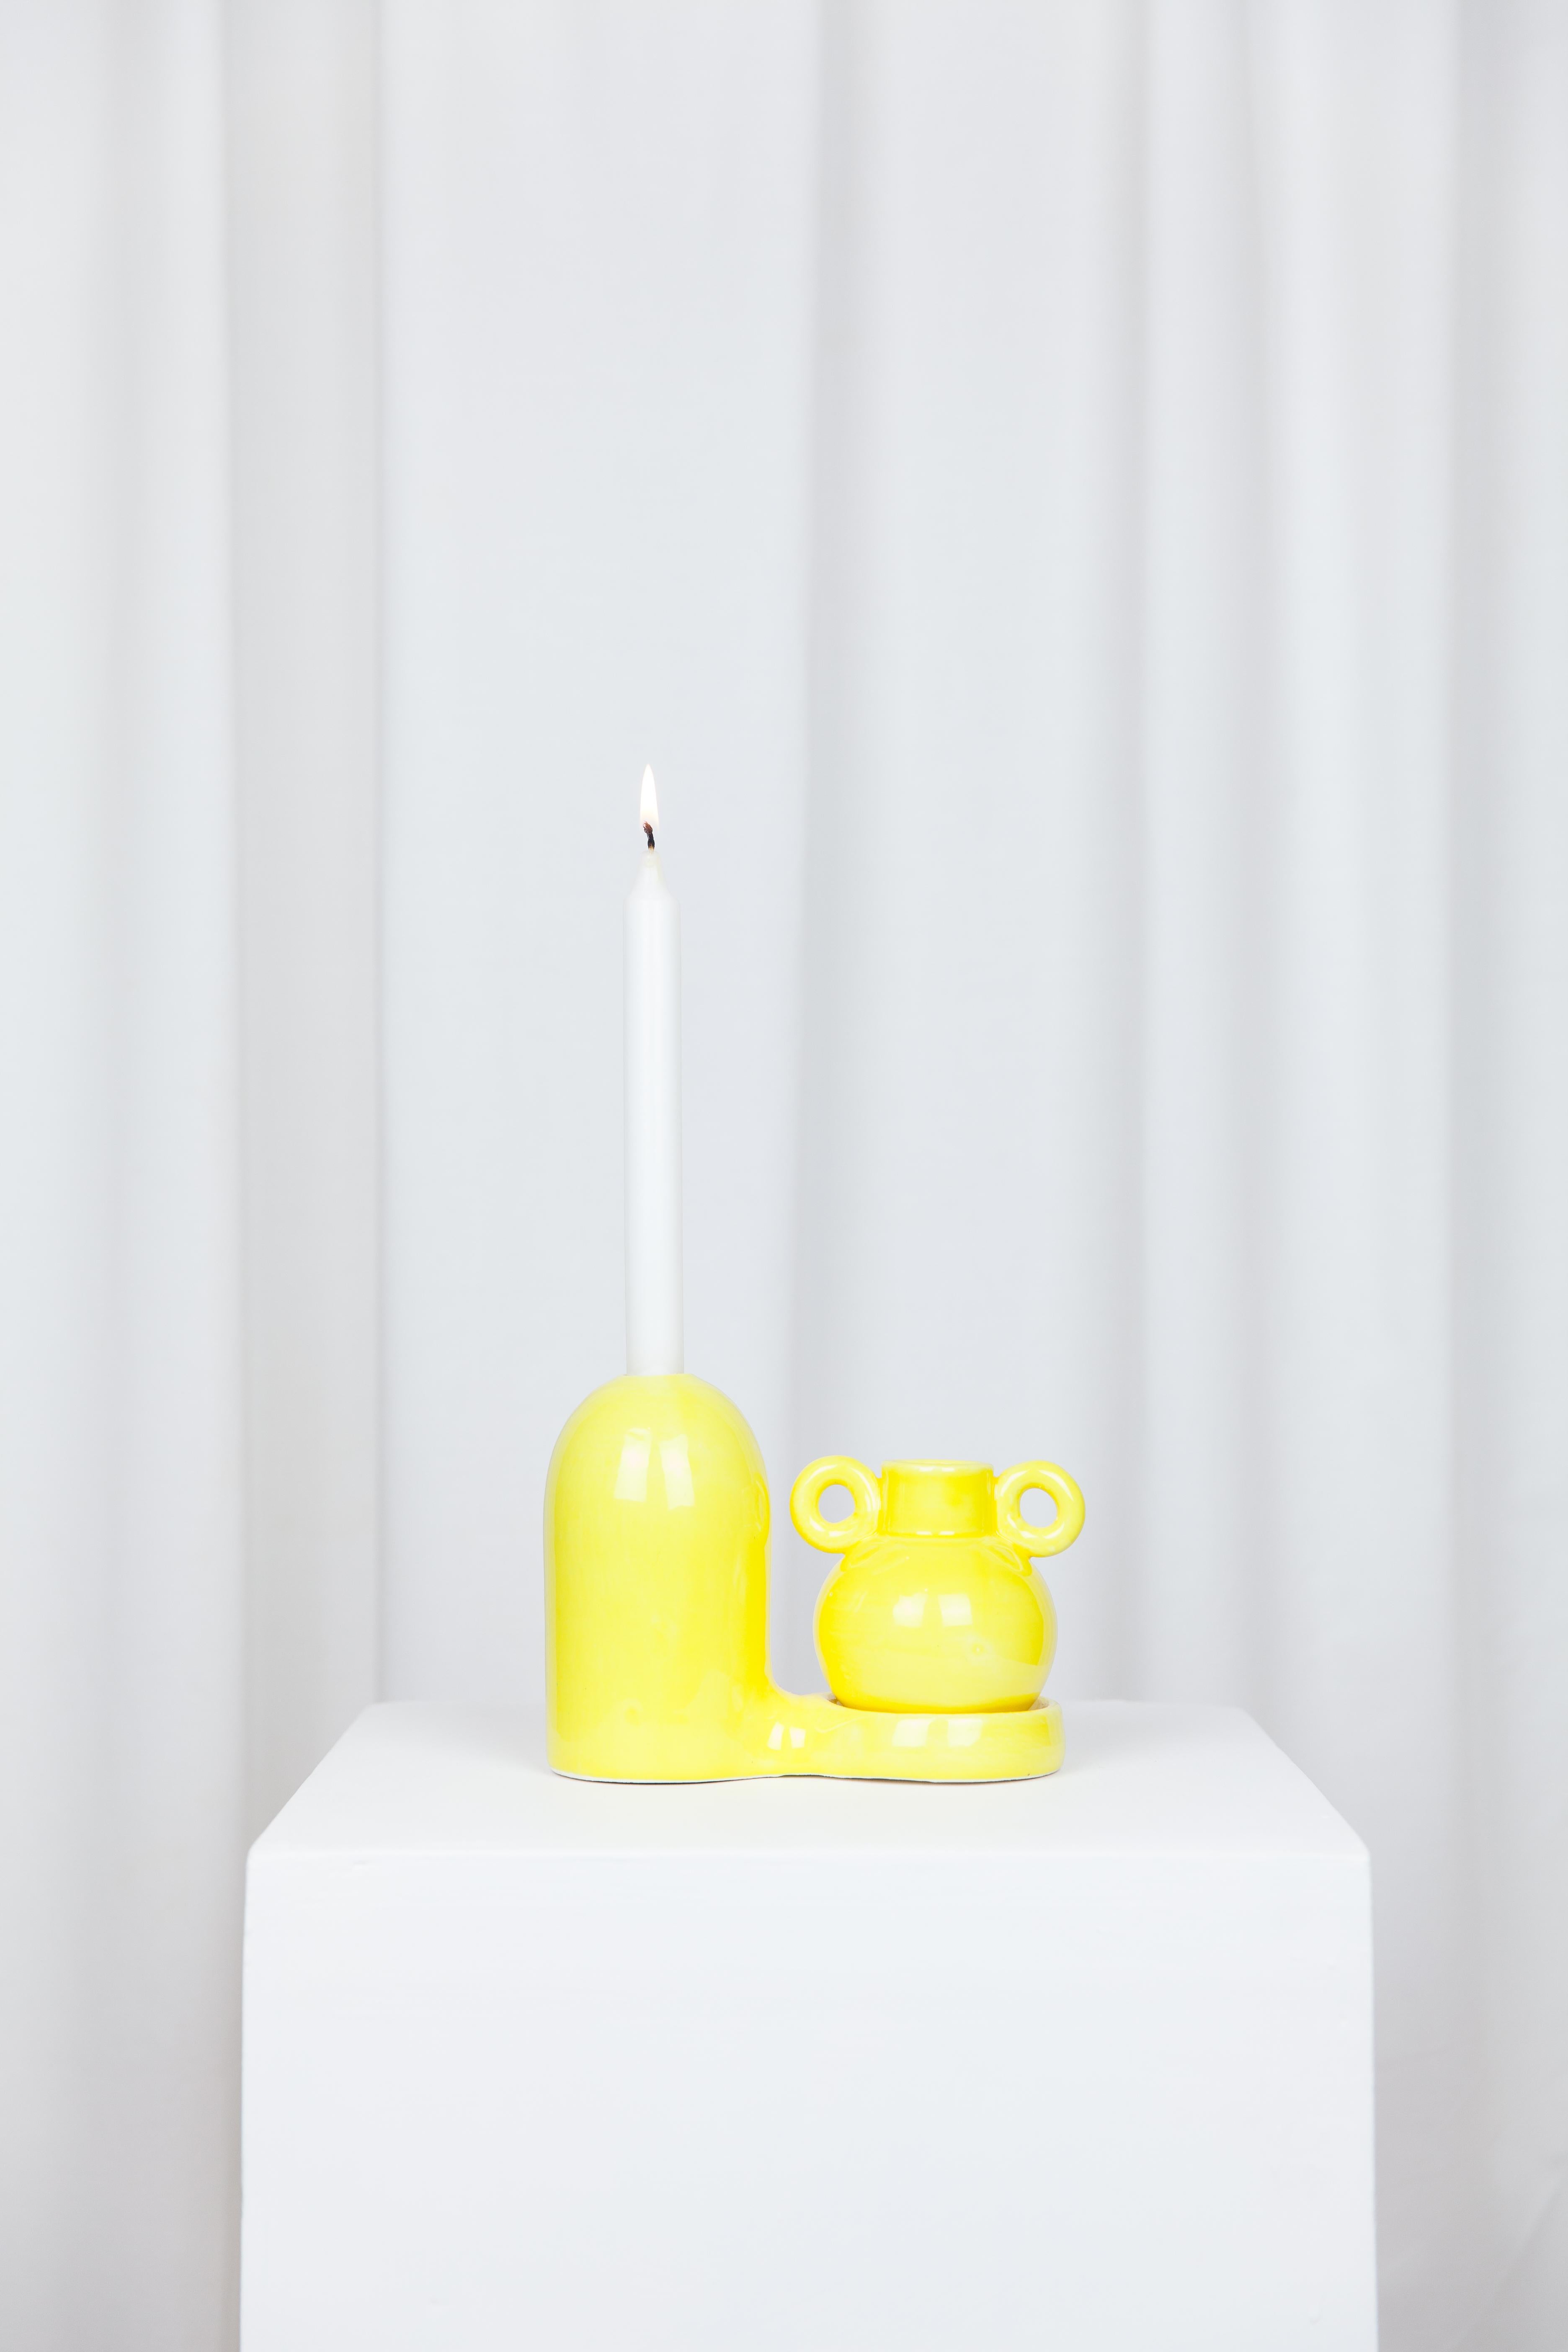 Pair of blend yellow candlestick by Lola Mayeras
Dimensions: D 16.5 x W 10 x W 13 cm
Materials: Earthenware.

Candlestick with detachable small vase, red earthenware with a wax finish. Small vase glazed in beige on the inside.
This piece is